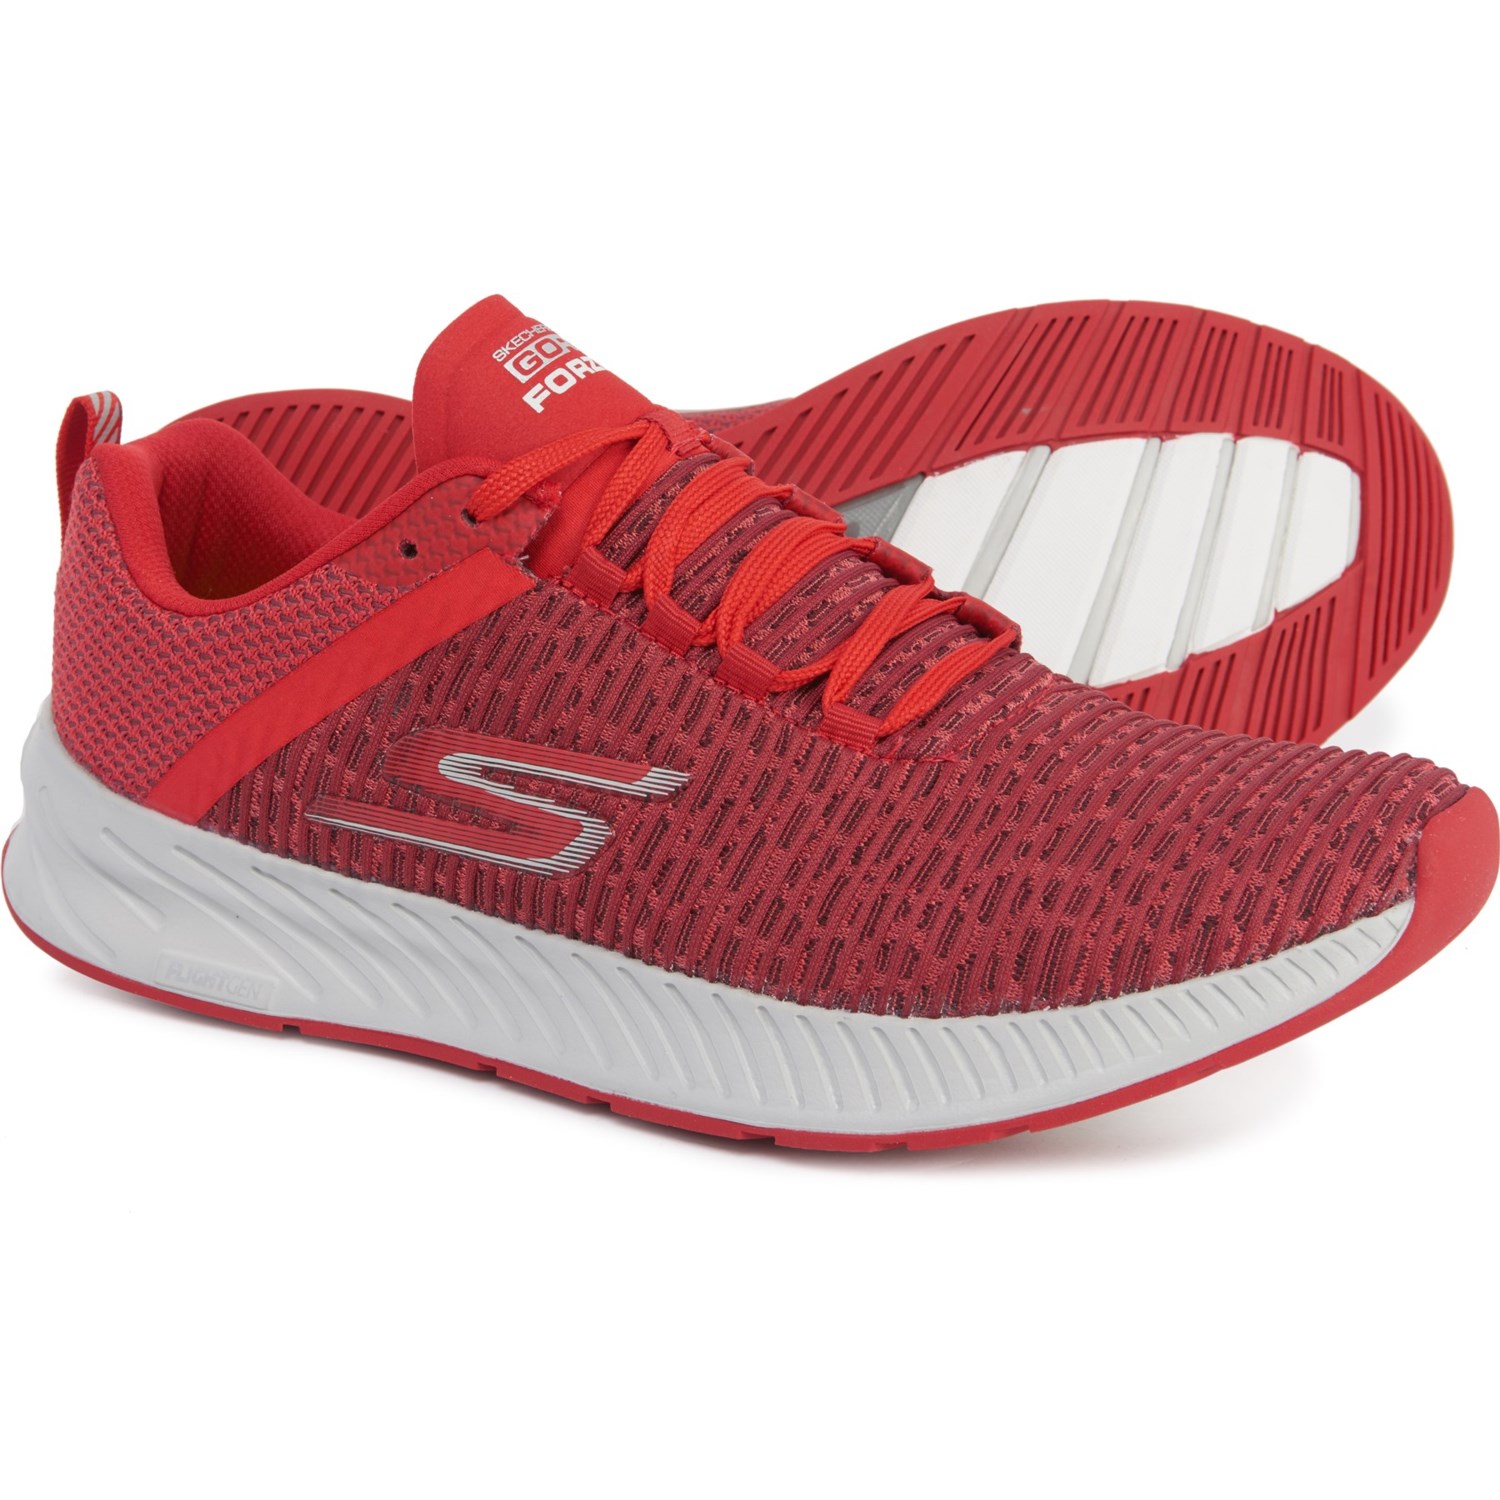 skechers skate shoes mens Sale,up to 45% Discounts